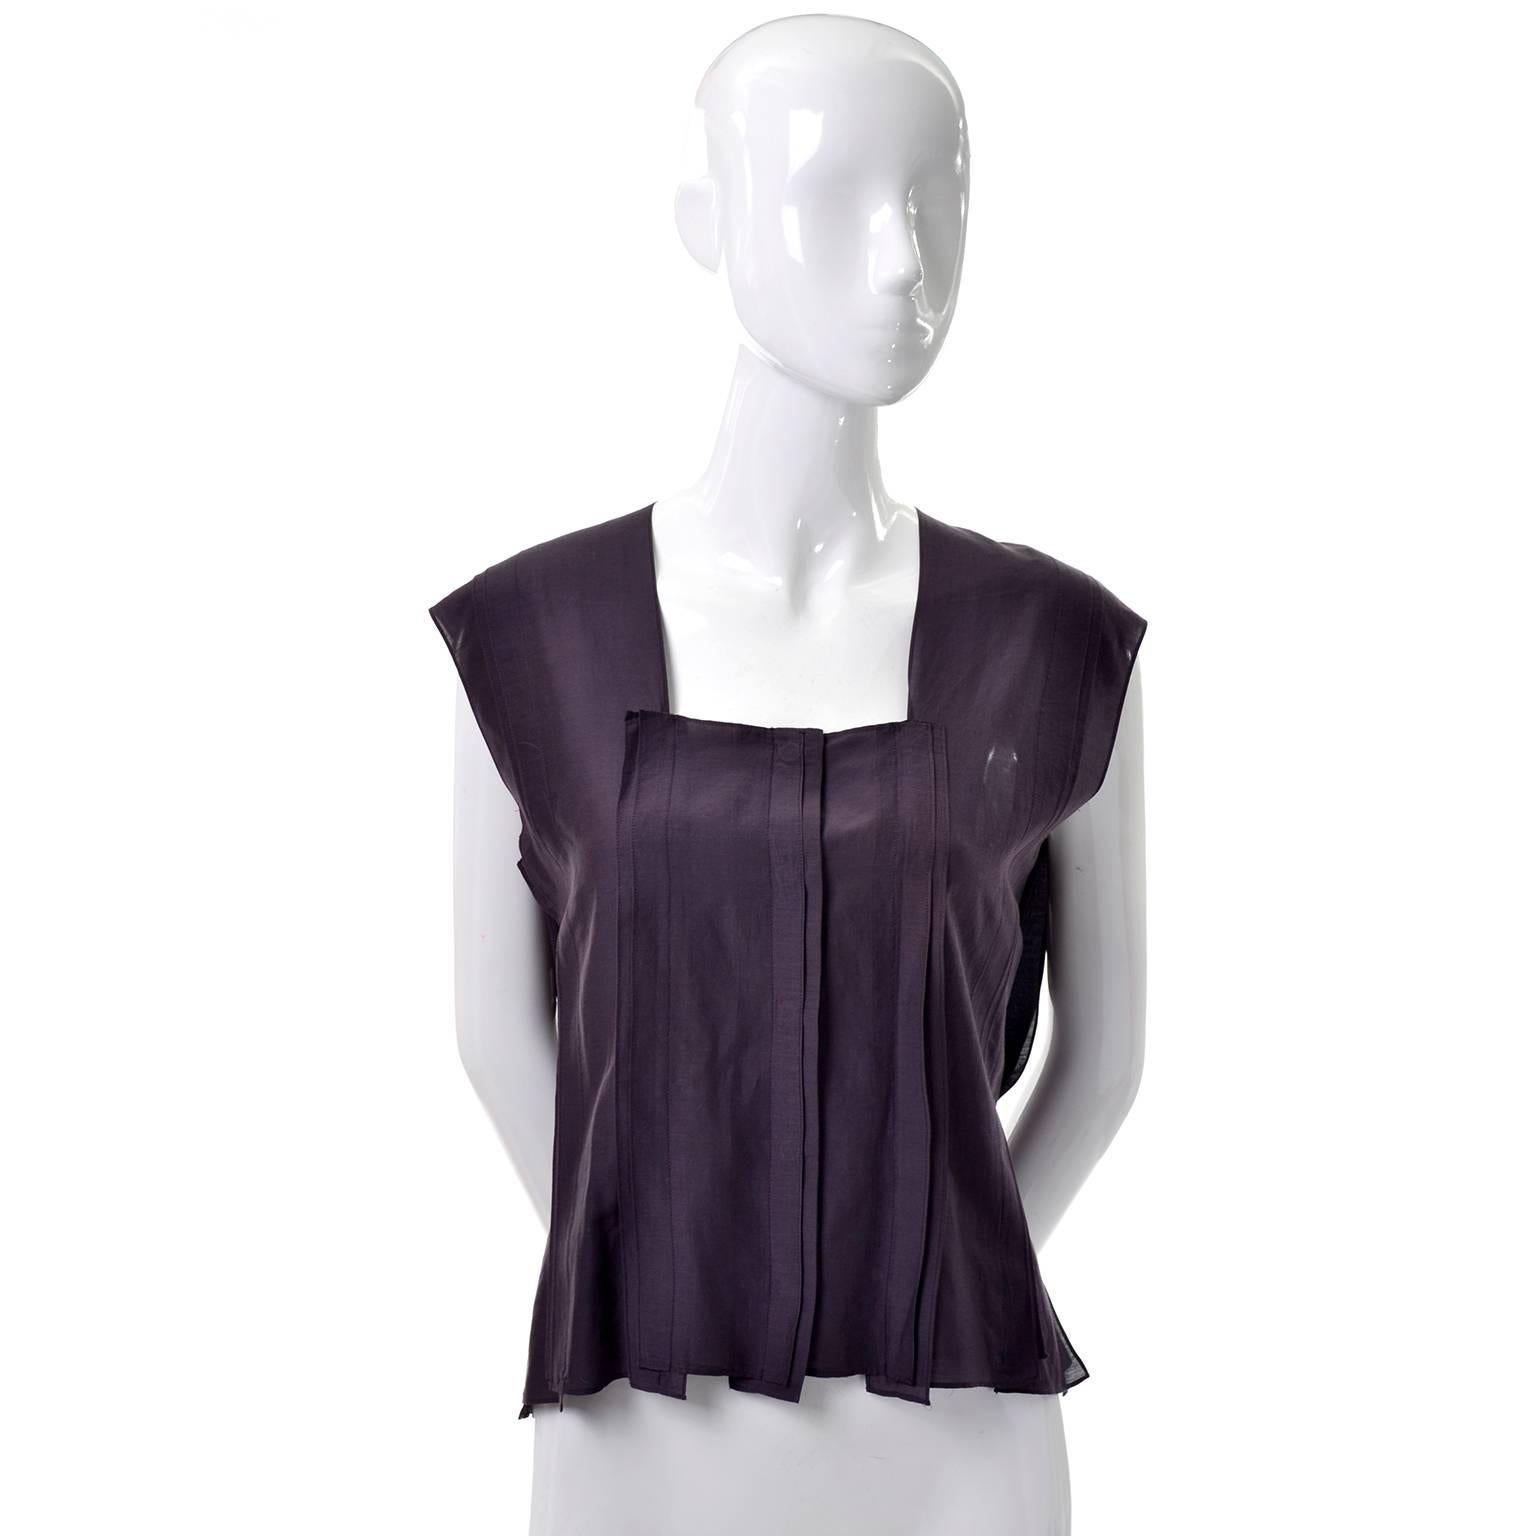 This is such a beautifully made Tom Ford for Yves Saint Laurent top with pretty top stitched pleating and hidden buttons up the front. There are unique panels that are semi open in the back that are hard to describe but remind of us contemporary